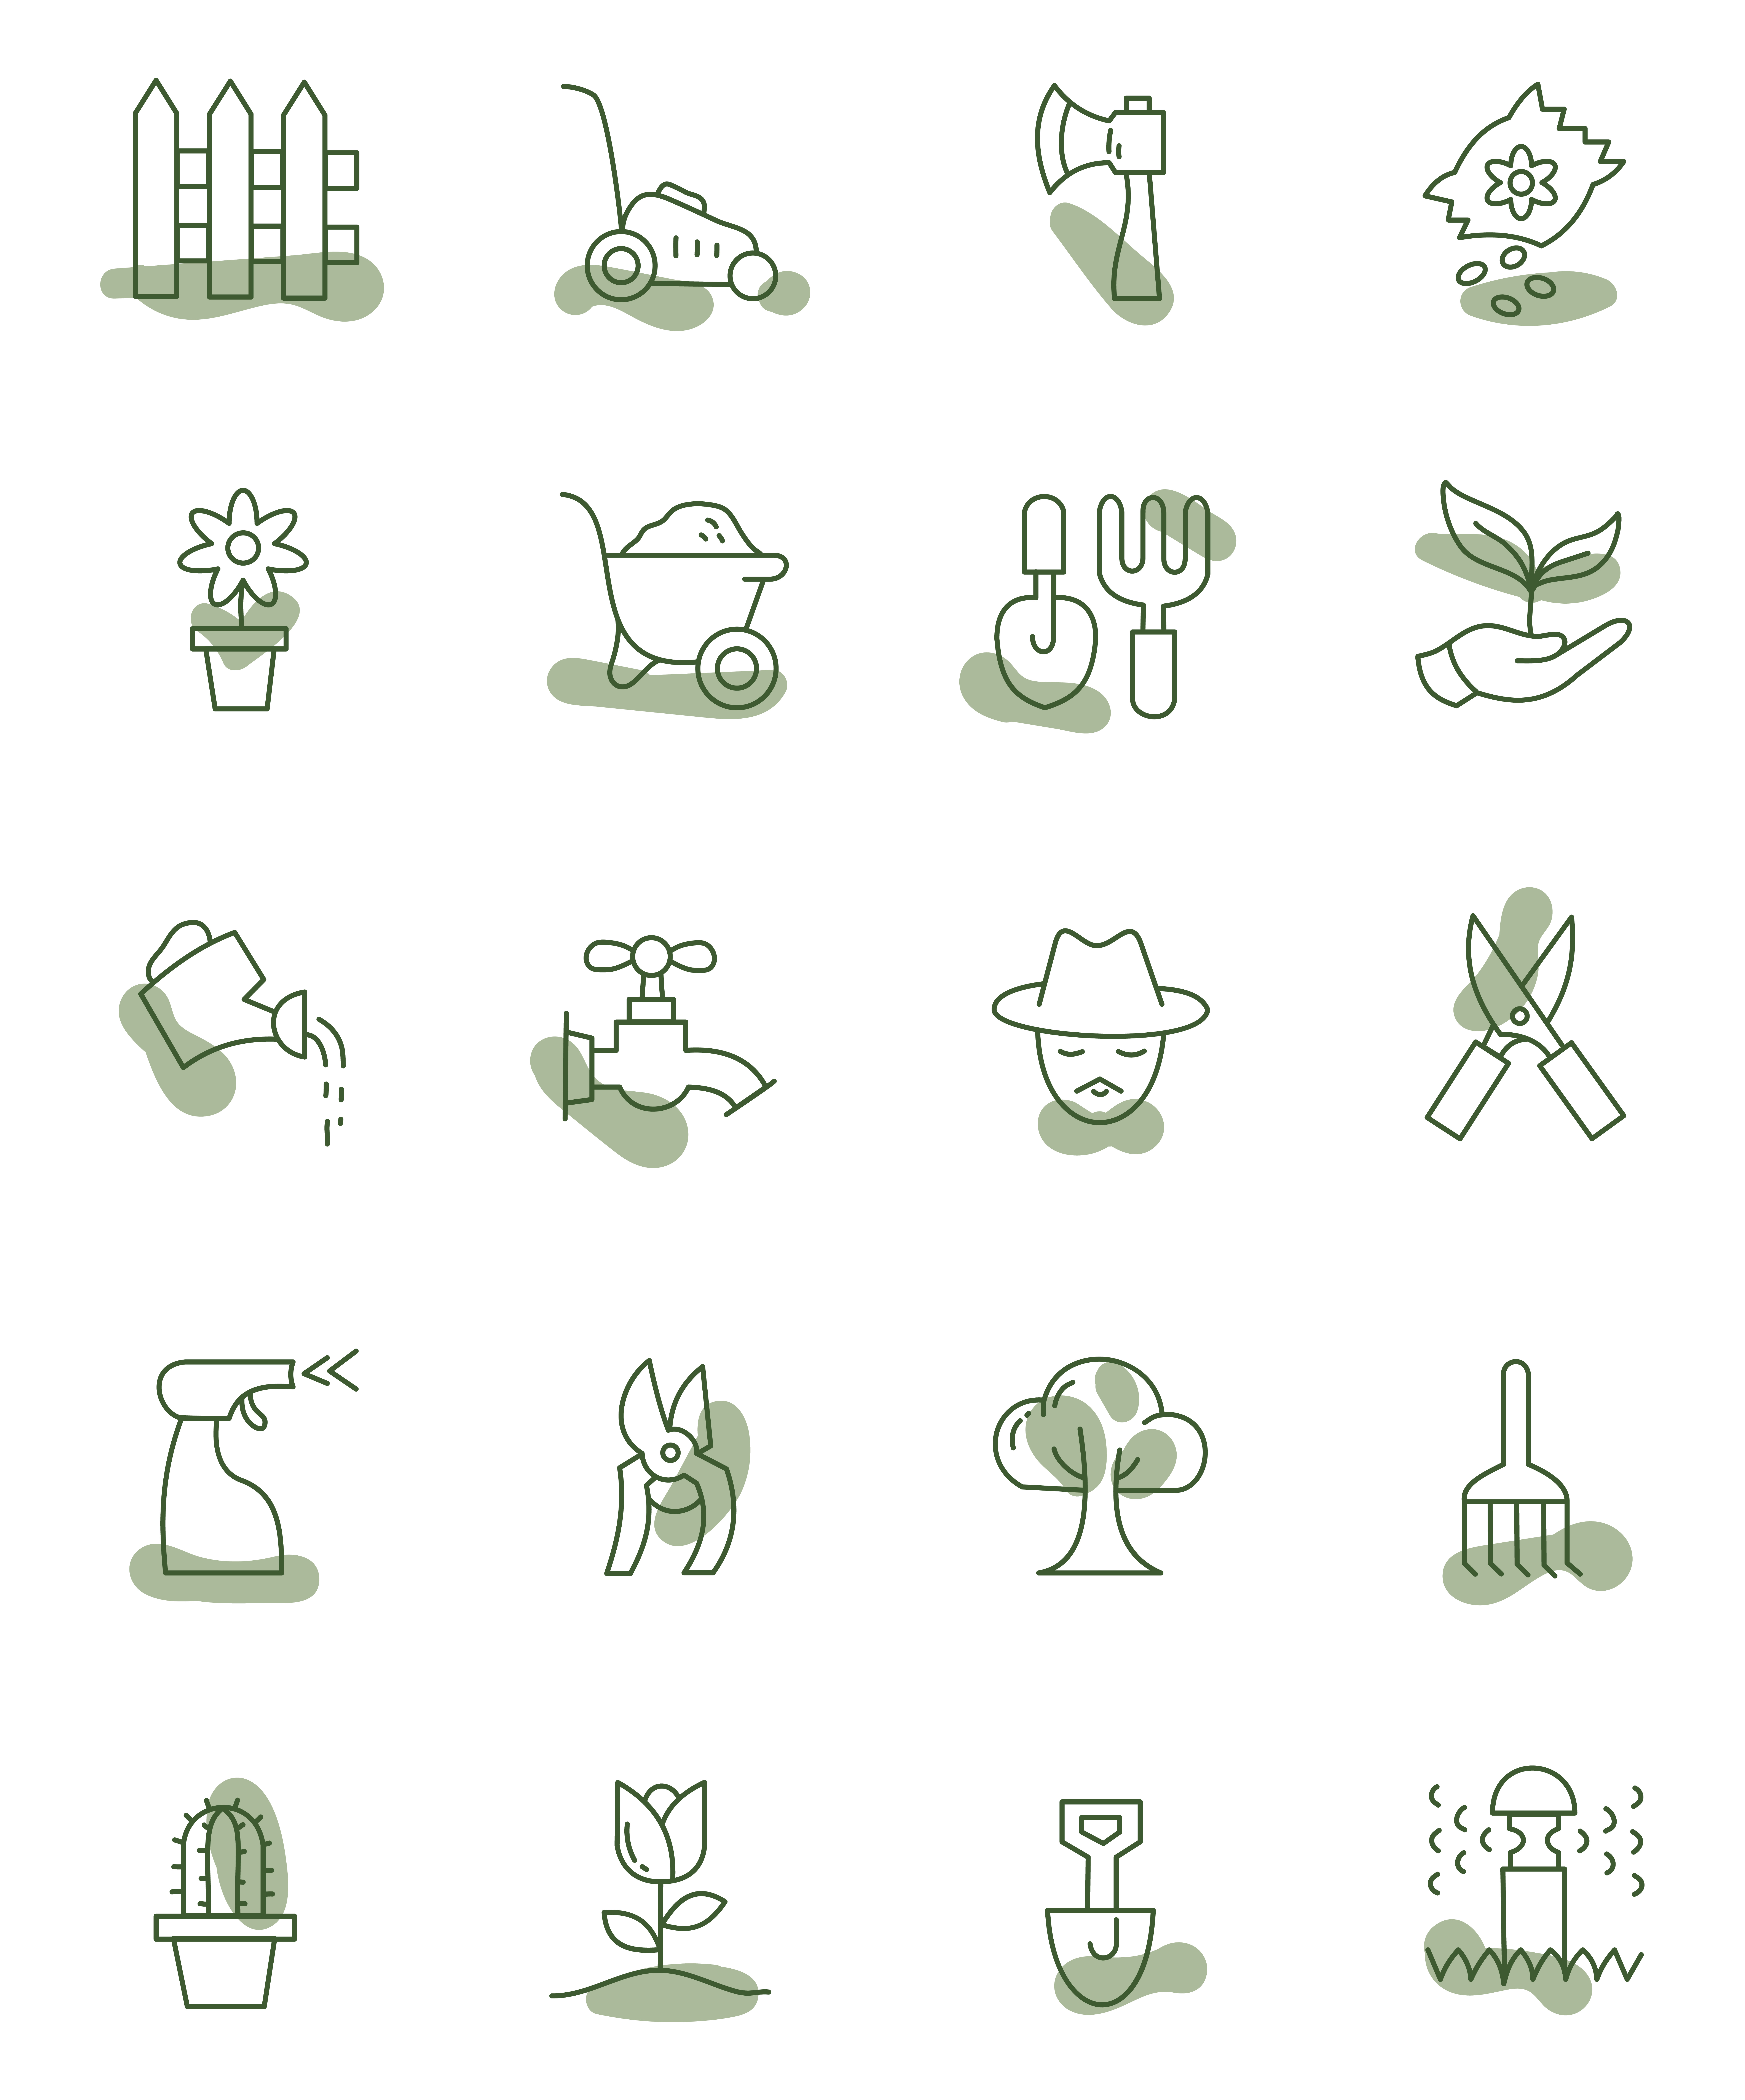 Bunch of different types of icons on a white background.